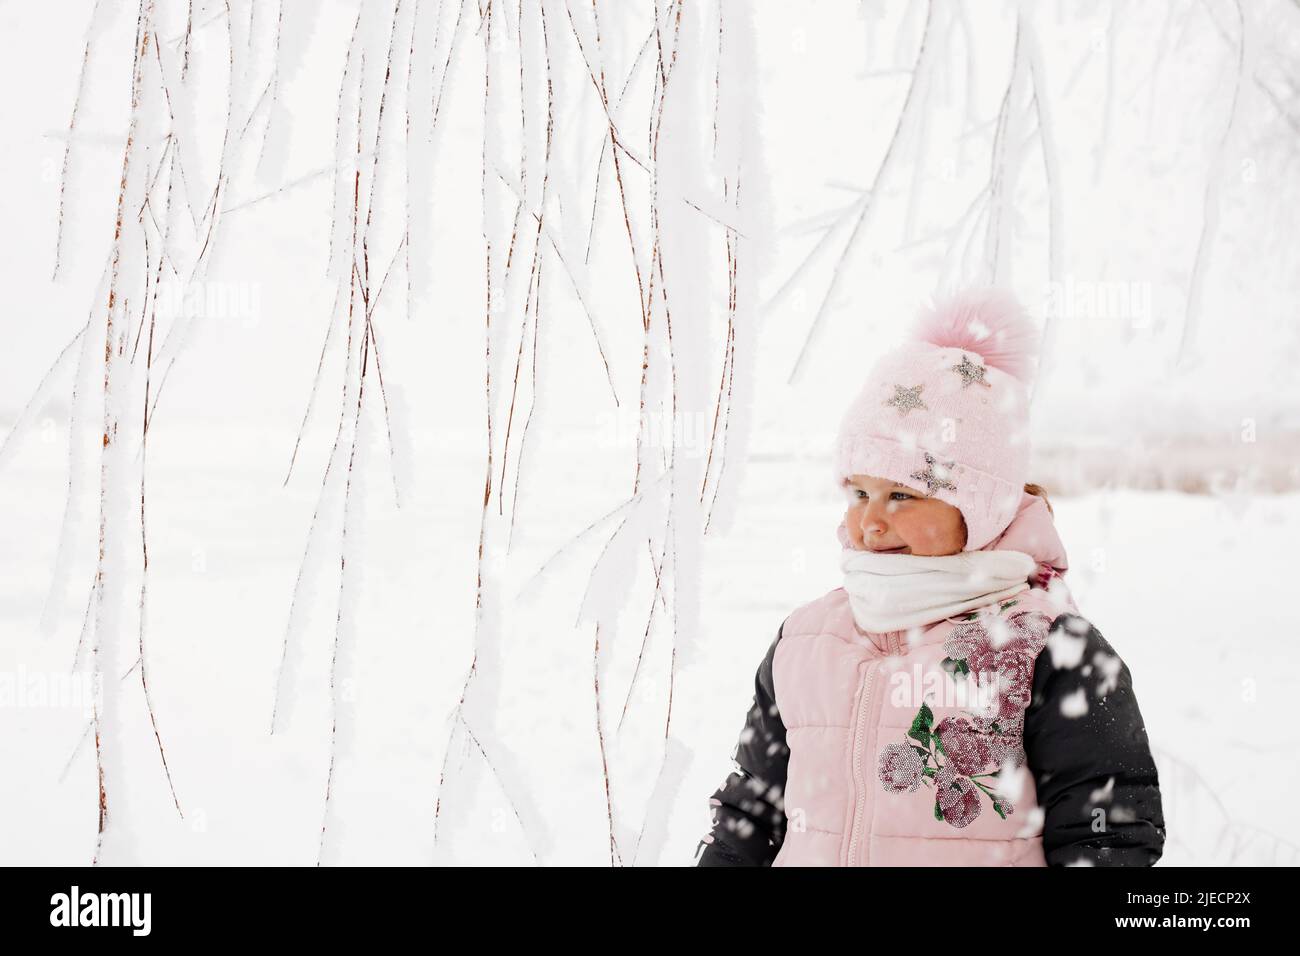 Tree branches covered with snow with blissful girl with rosy cheeks looking away dressed in warm winter clothes with snowy field in background. Winter Stock Photo